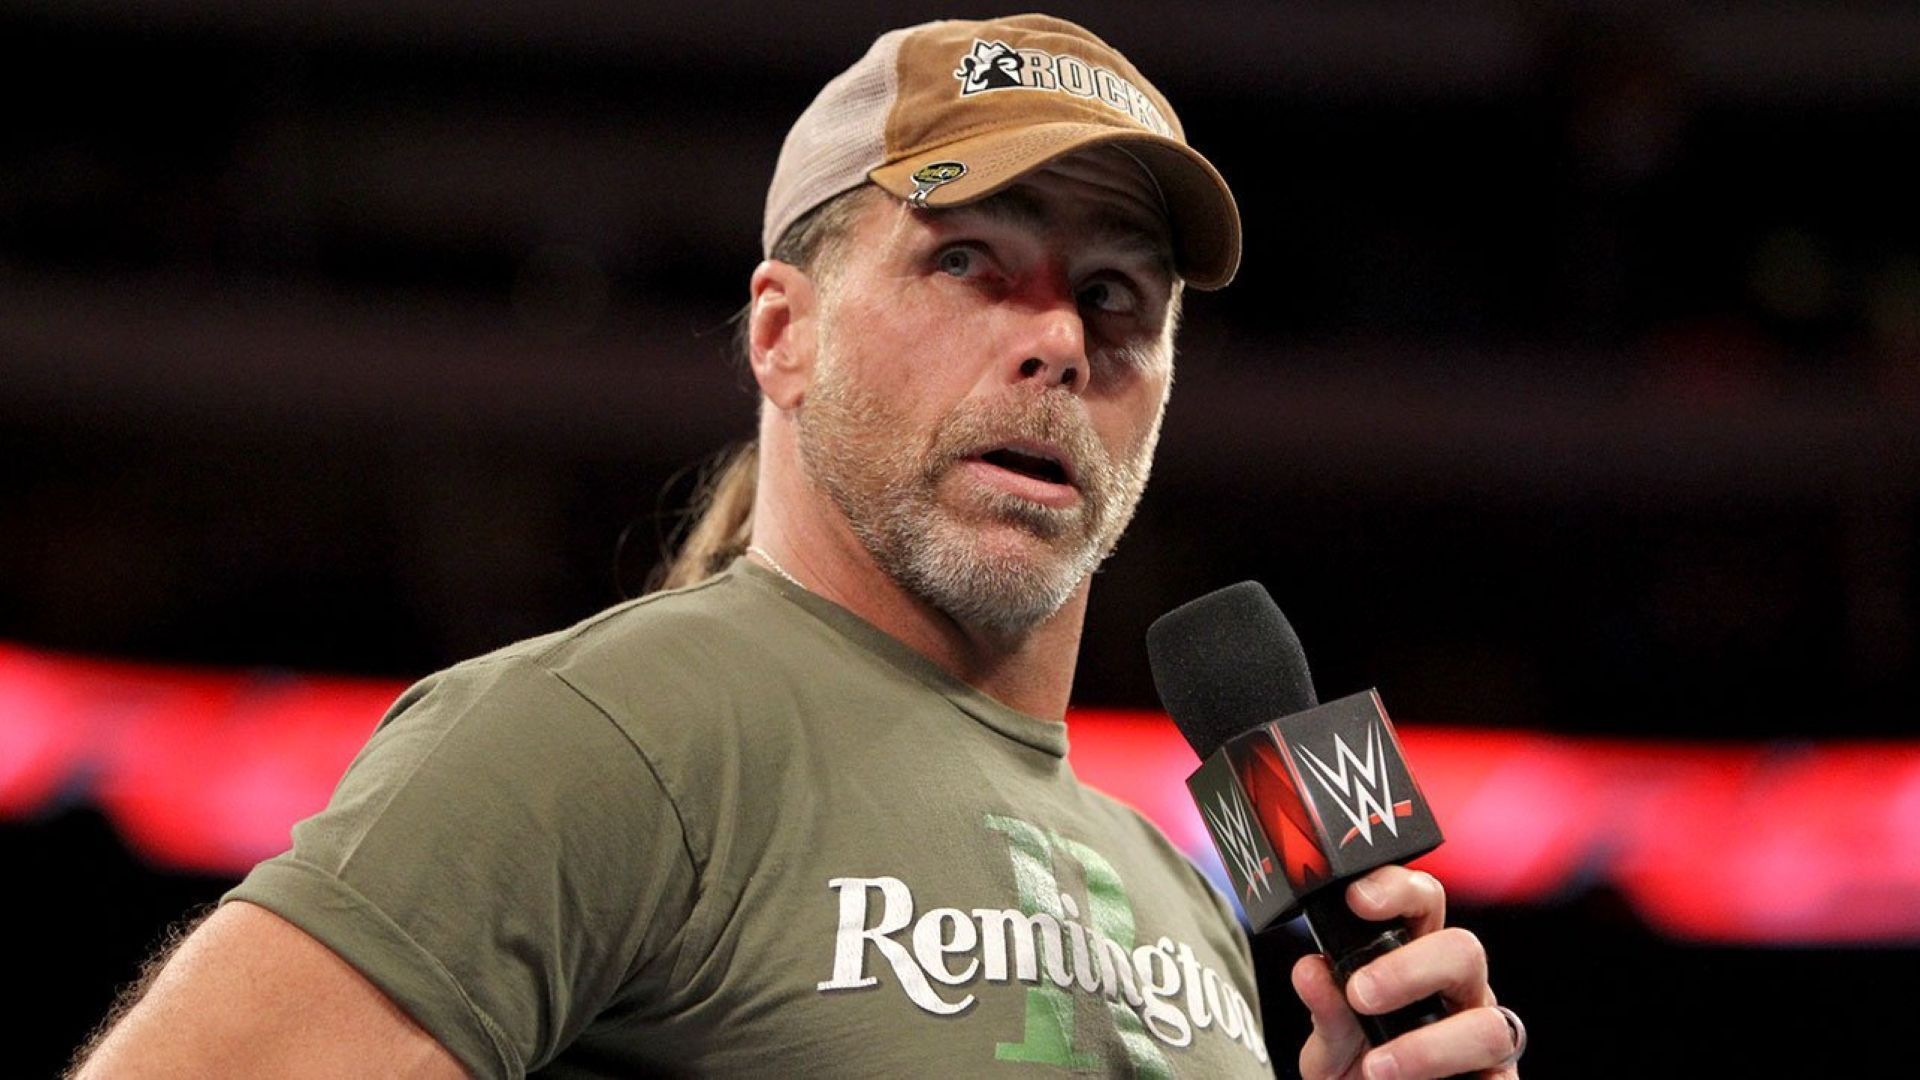 This WWE star was embraced by Shawn Michaels